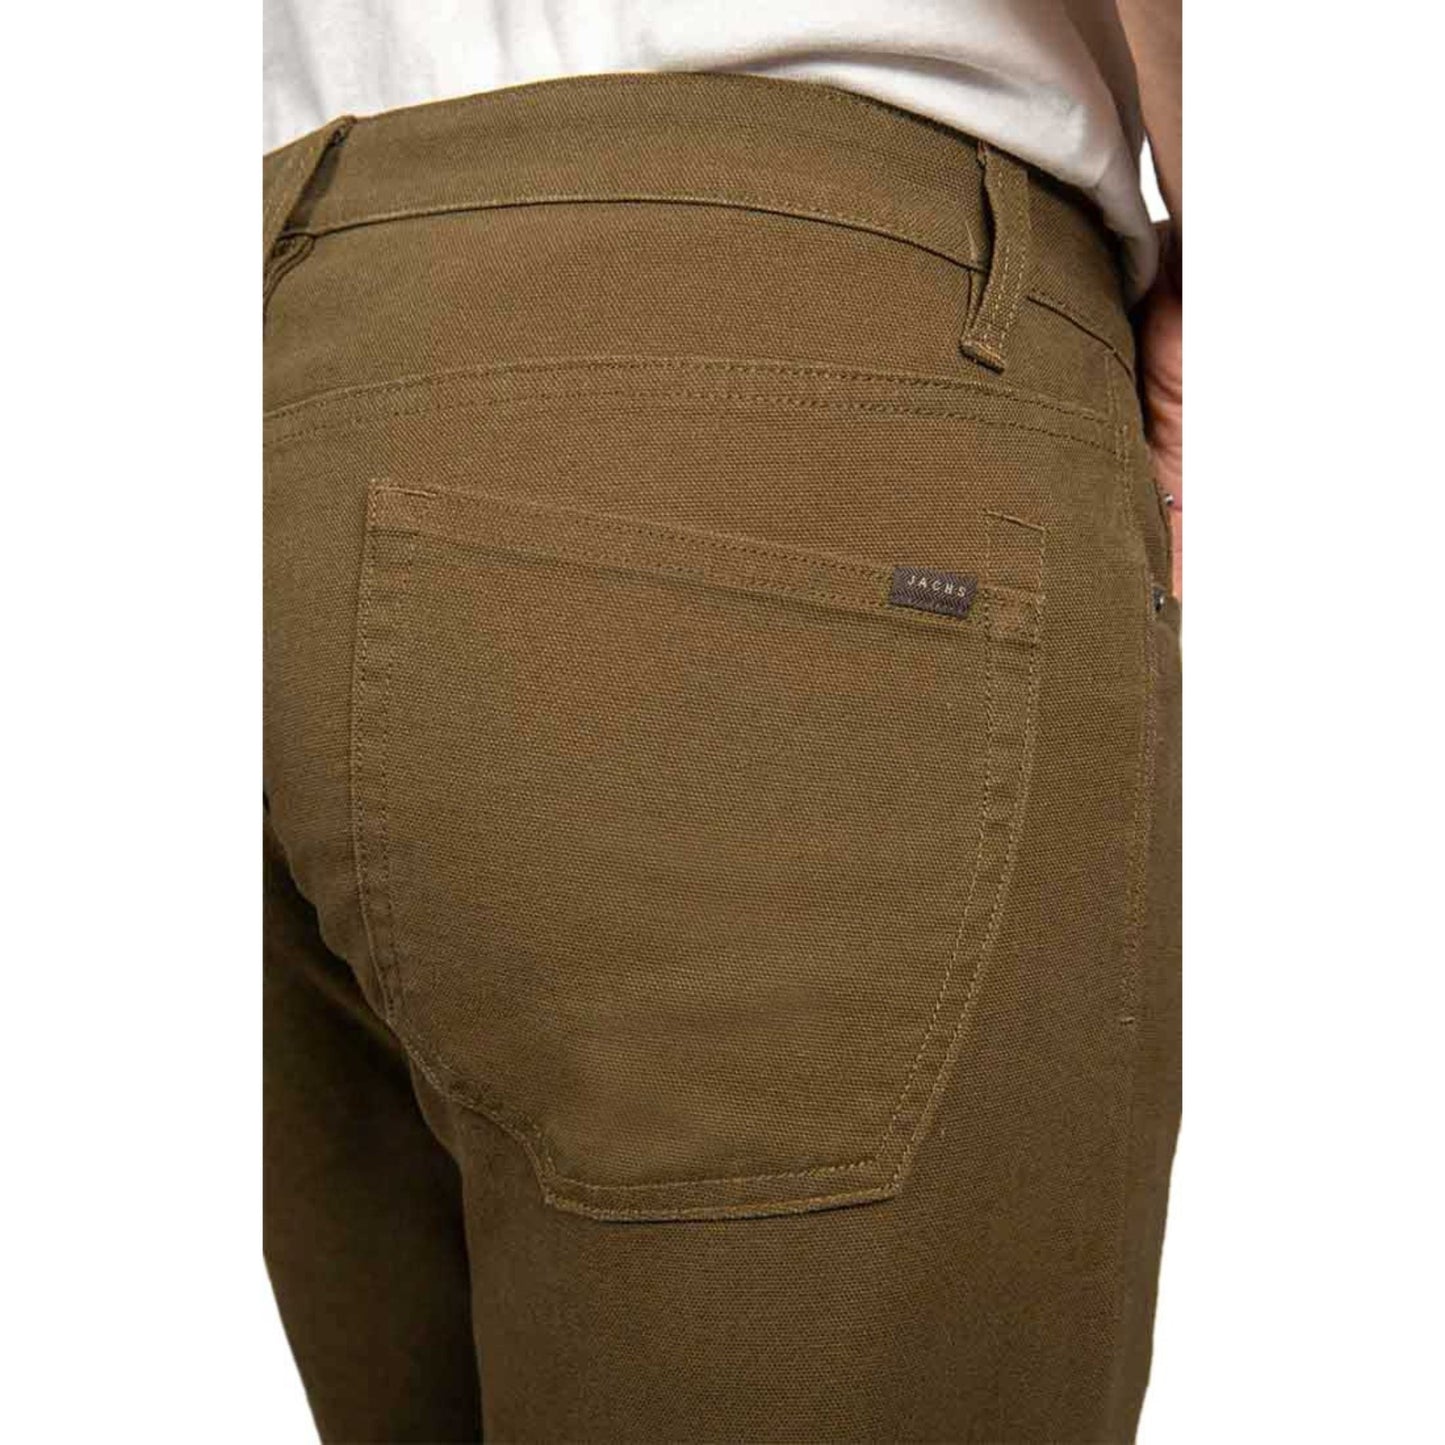 JACHS NEW YORK BROWN STRAIGHT FIT STRETCH CANVAS PANT 32X32